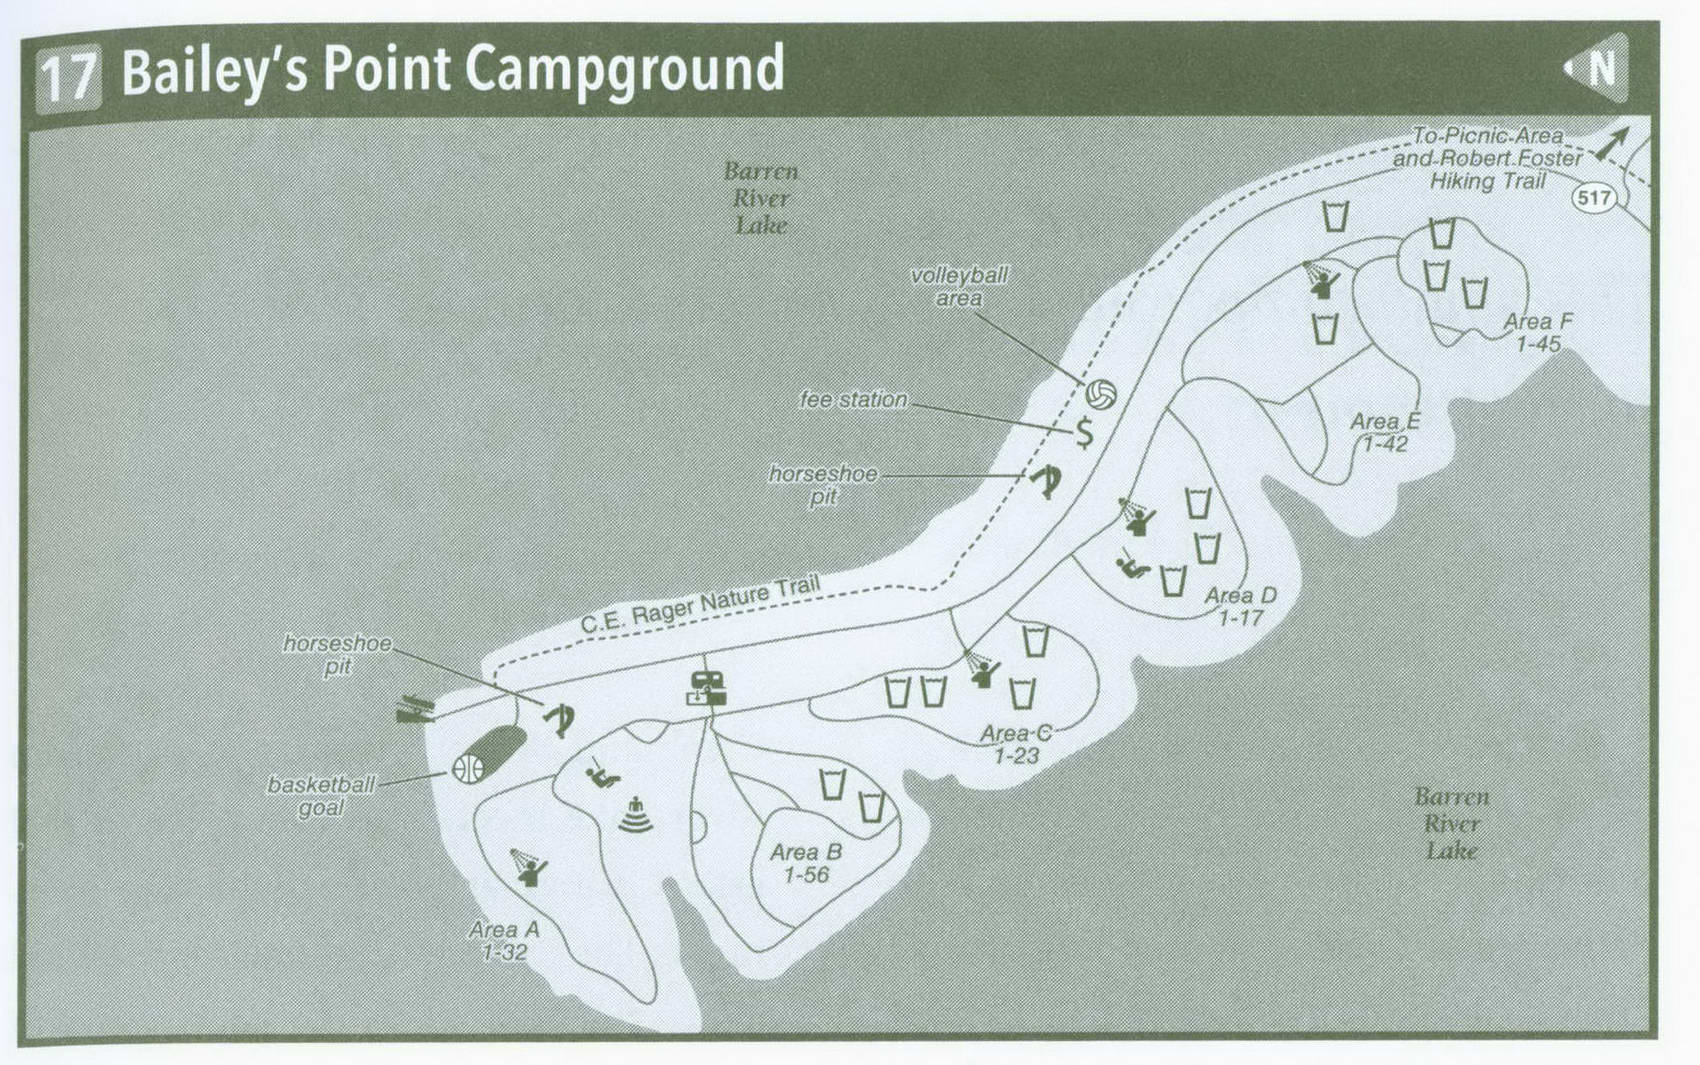 Plan of Bailey's Point Campground